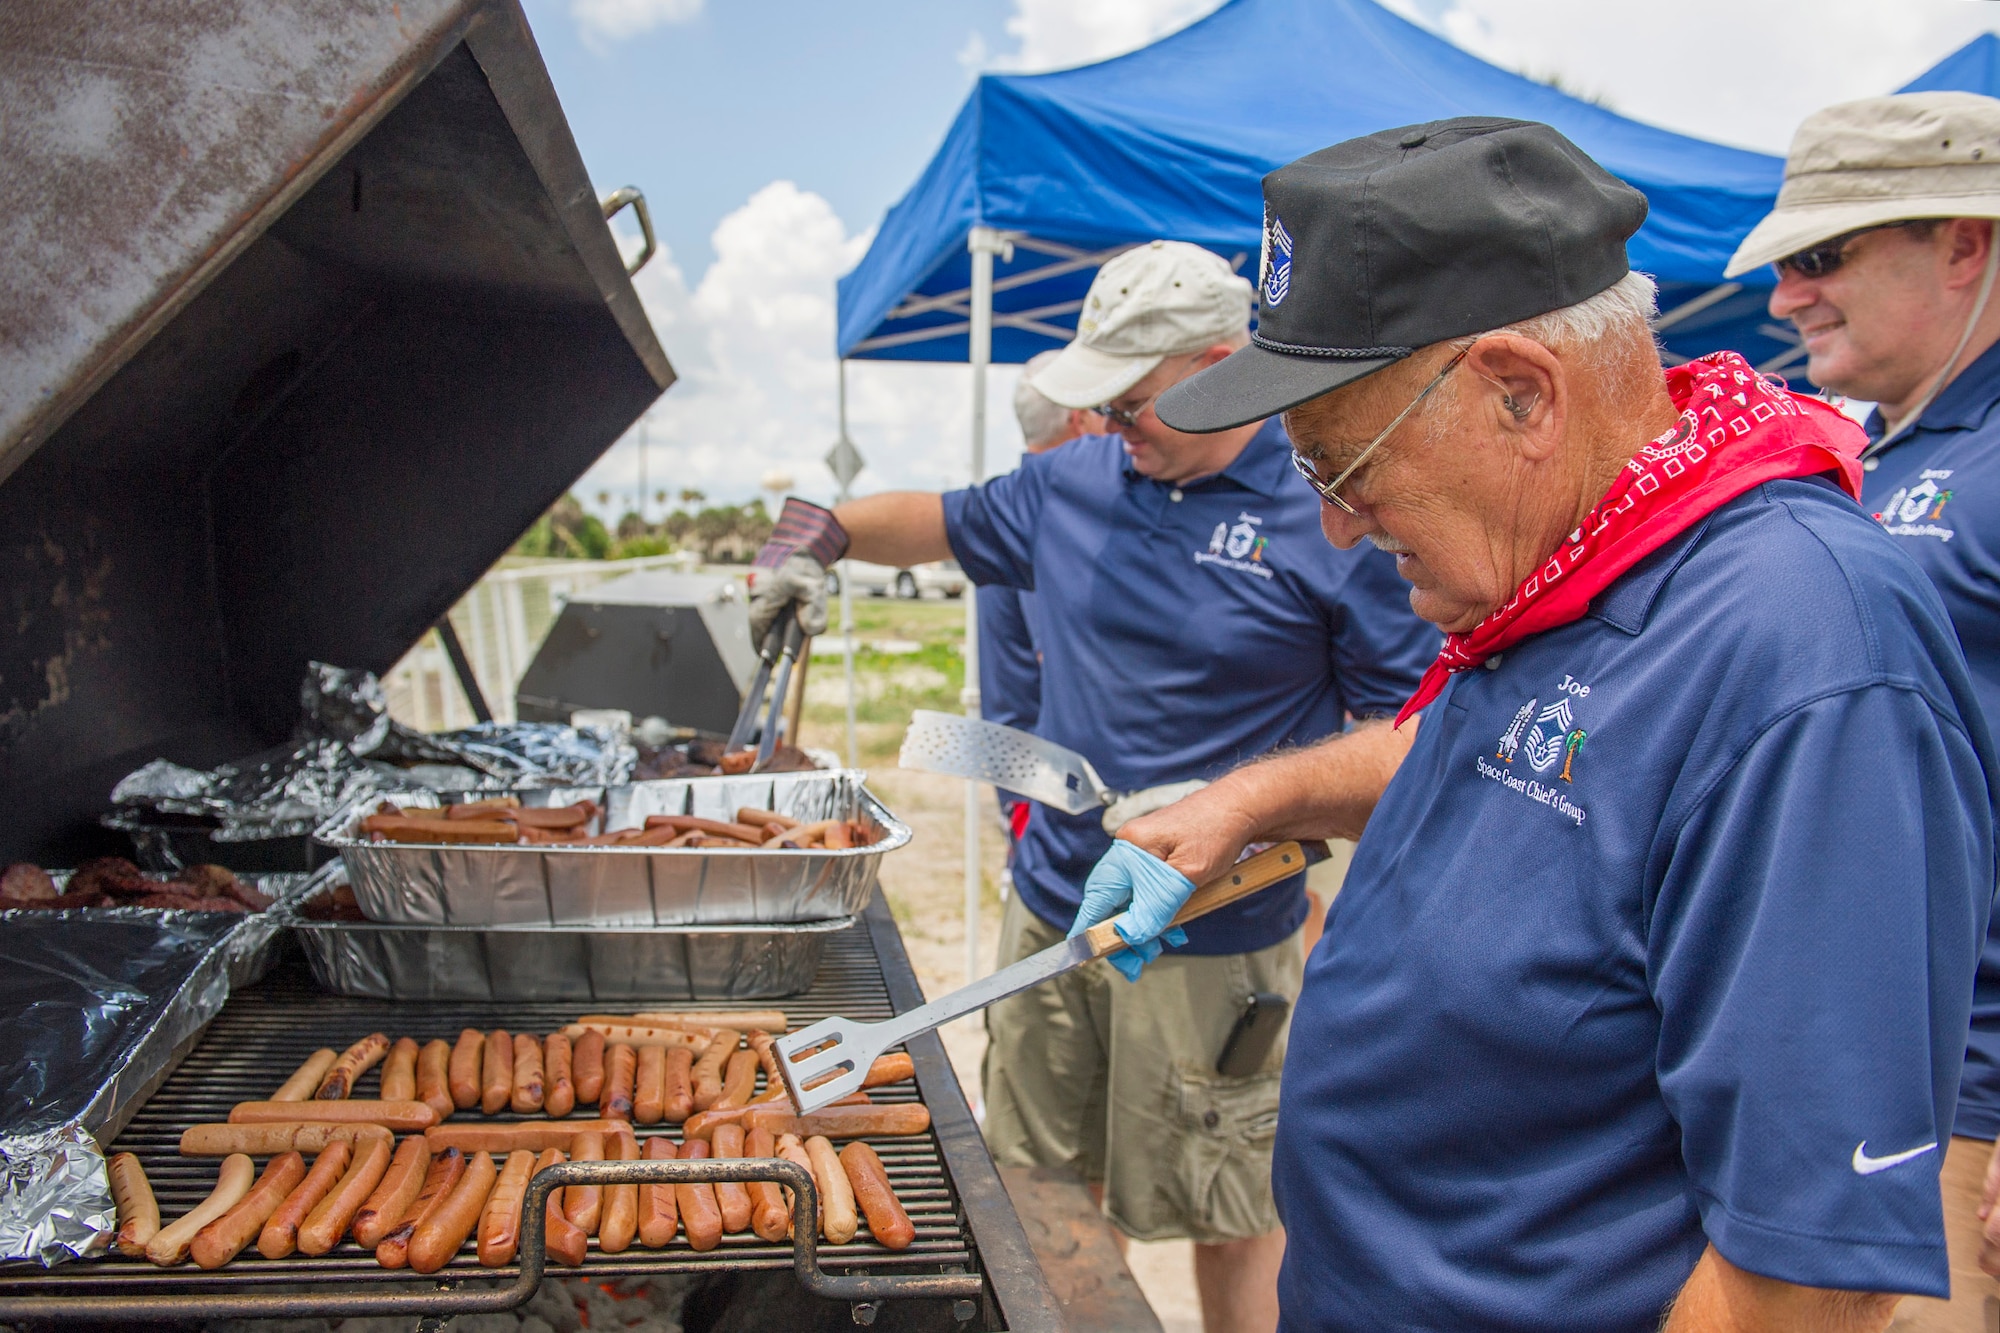 Retired Chief Master Sgt. Joe Pannitto, Chief Master Sgt. James Isom, 45th Operations Group (back left), and, Chief Master Sgt. Gerald “Jerry” McFadden, Air Force Technical Applications Center (back right), grill hot dogs during the Junior Enlisted Appreciation Picnic June 20 at the Patrick Air Force Base, Fla., Beach House.  The Patrick AFB Top 3 and the Military Affairs Committee hosted the event which was open to all military services E-6 and below. (U.S. Air Force photo/Matthew Jurgens)